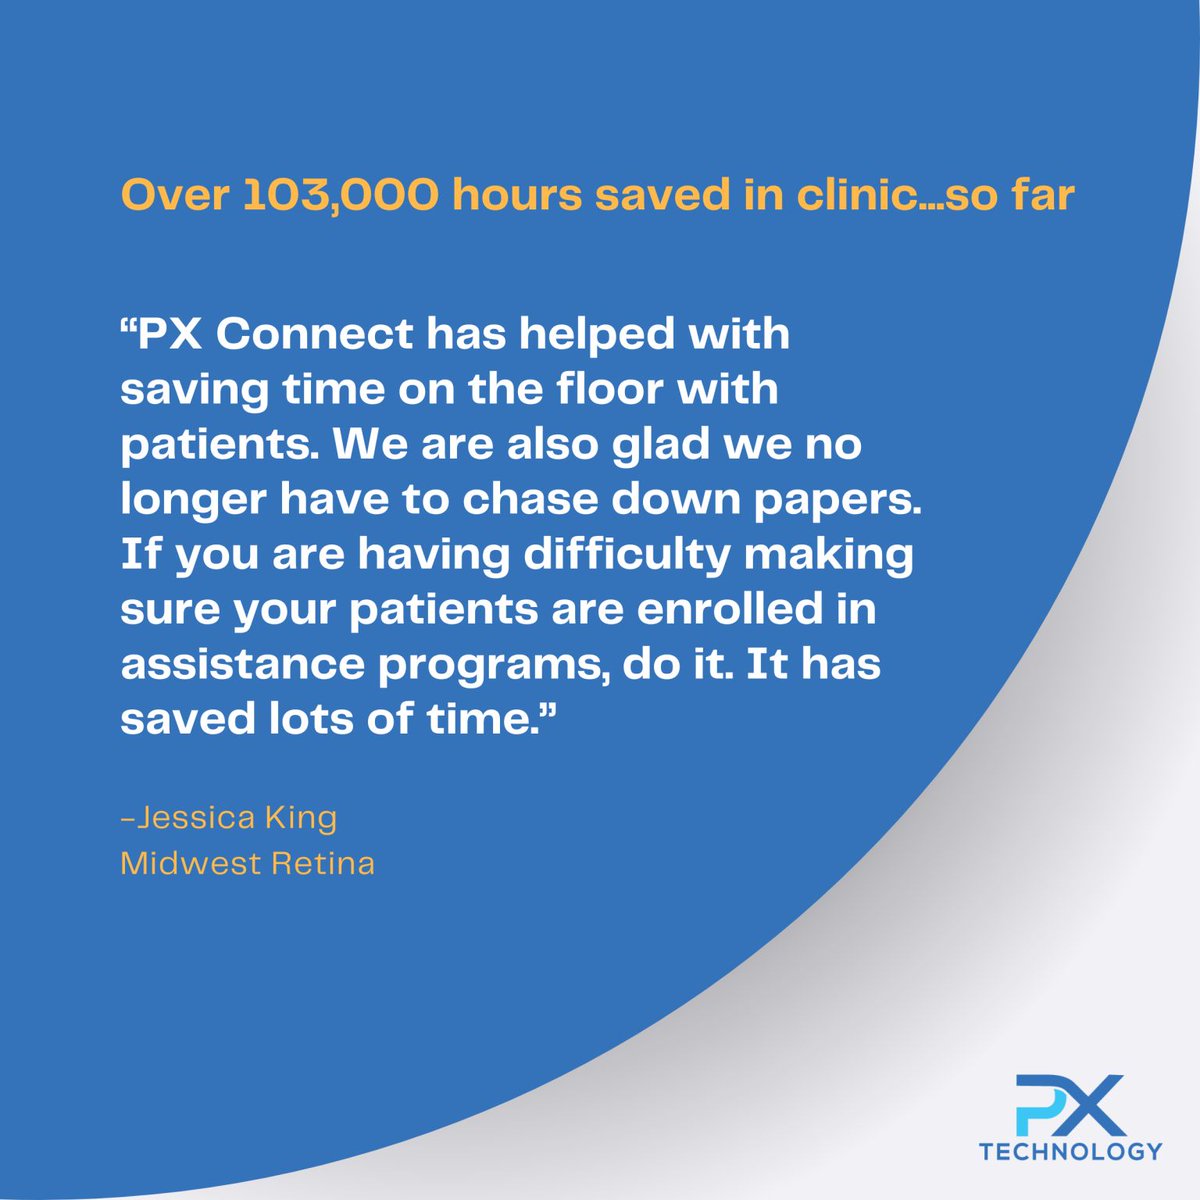 How many hours could you save in your practice by digitizing and streamlining patient enrollment forms? To schedule a Demo: pxtechnology.com/book-a-demo